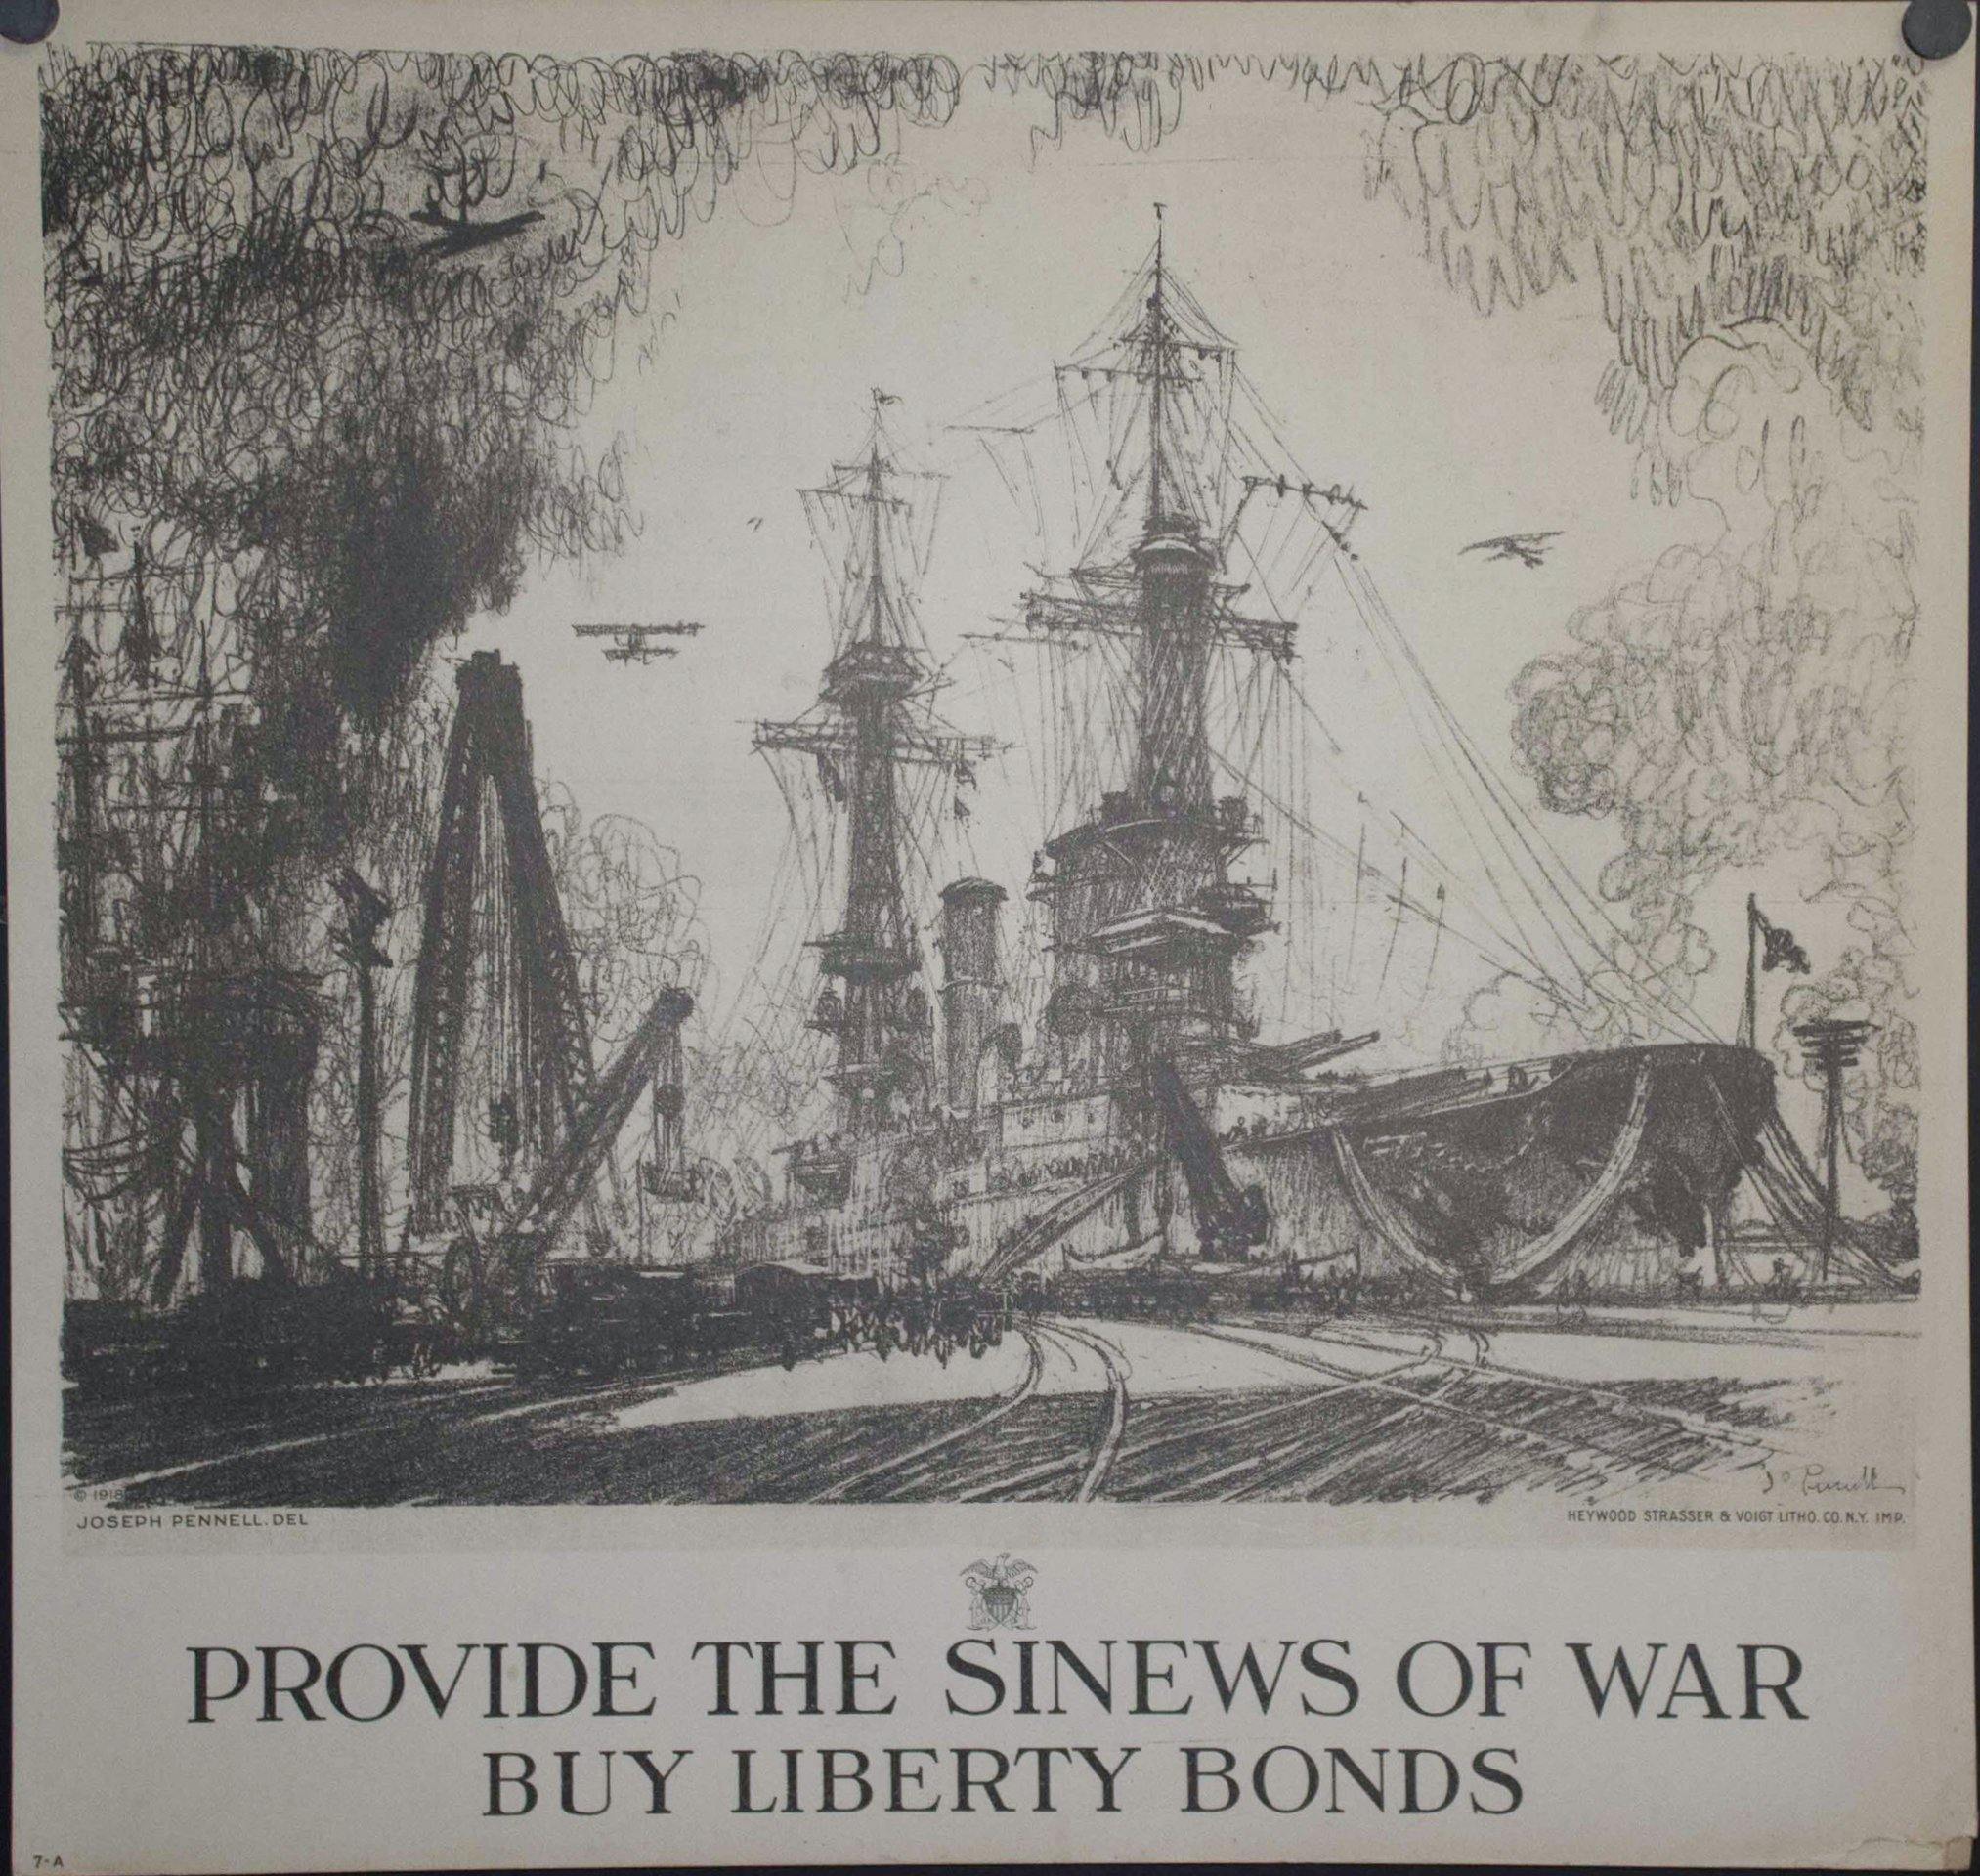 1918 Provide the Sinews of War Buy Liberty Bonds by Joseph Pennell - Golden Age Posters